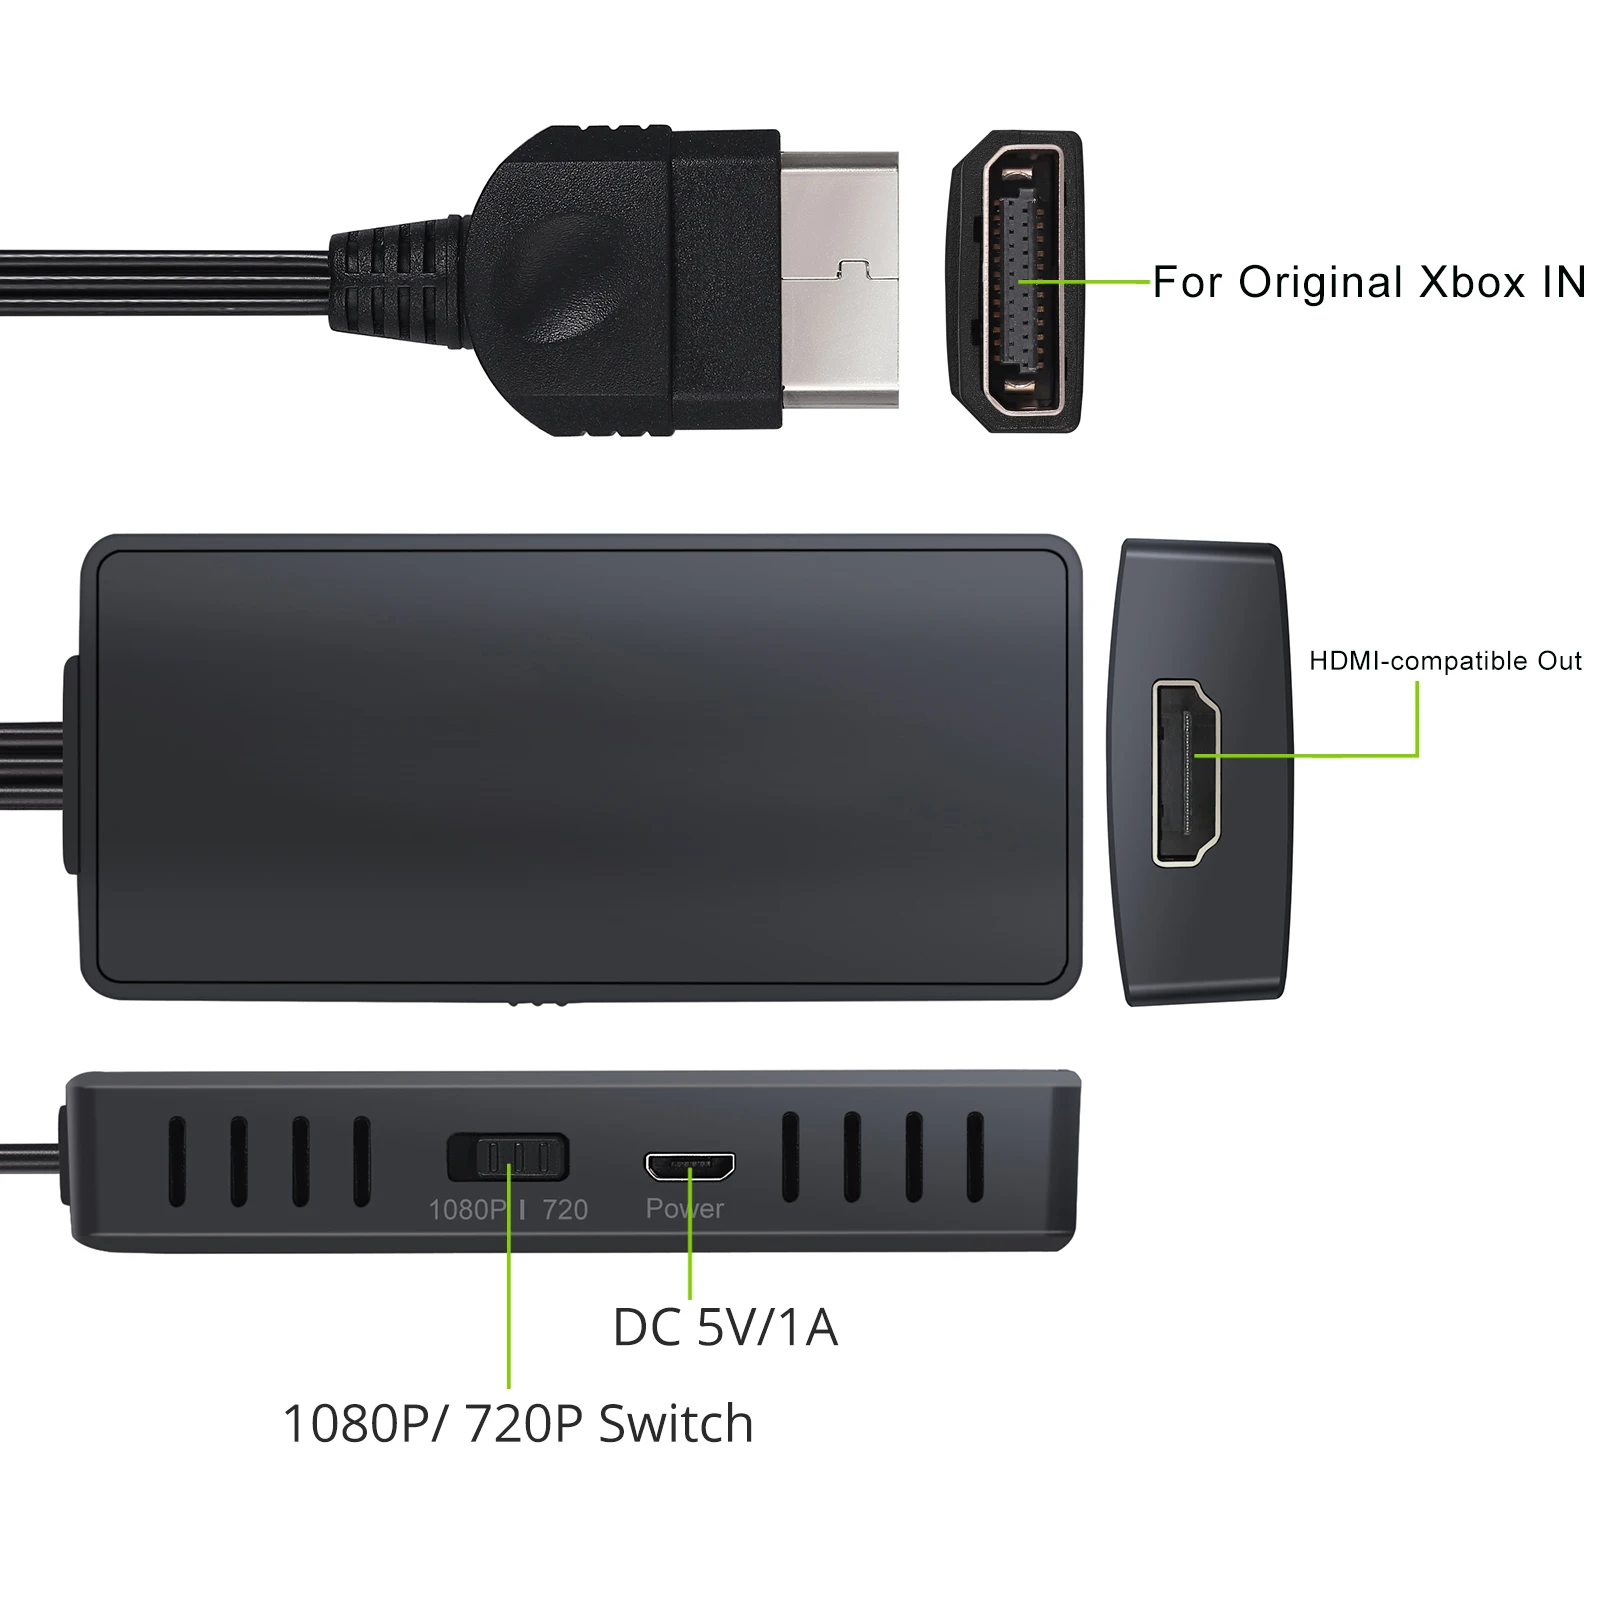 Xbox Hdmi- Converter Adapter Hd Cable Support 1080p/720p Tv - AliExpress